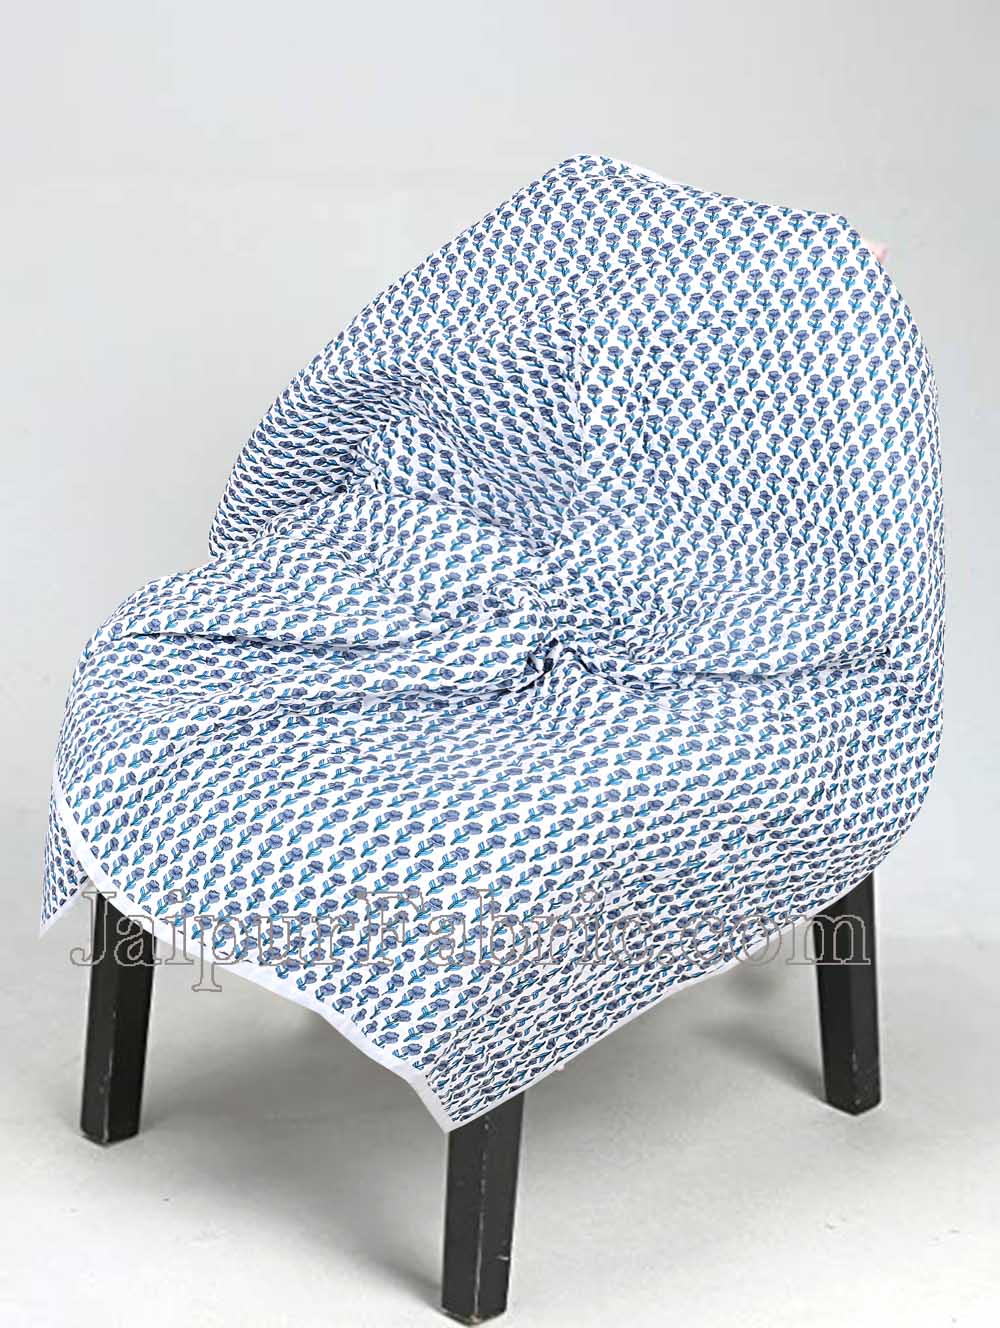 Baby Blanket Newborn Blue & Grey Soft Crib Comforter and Toddler Swaddling Blankets for Babies 120 x 120 cm Colourful White Base Baby Quilt